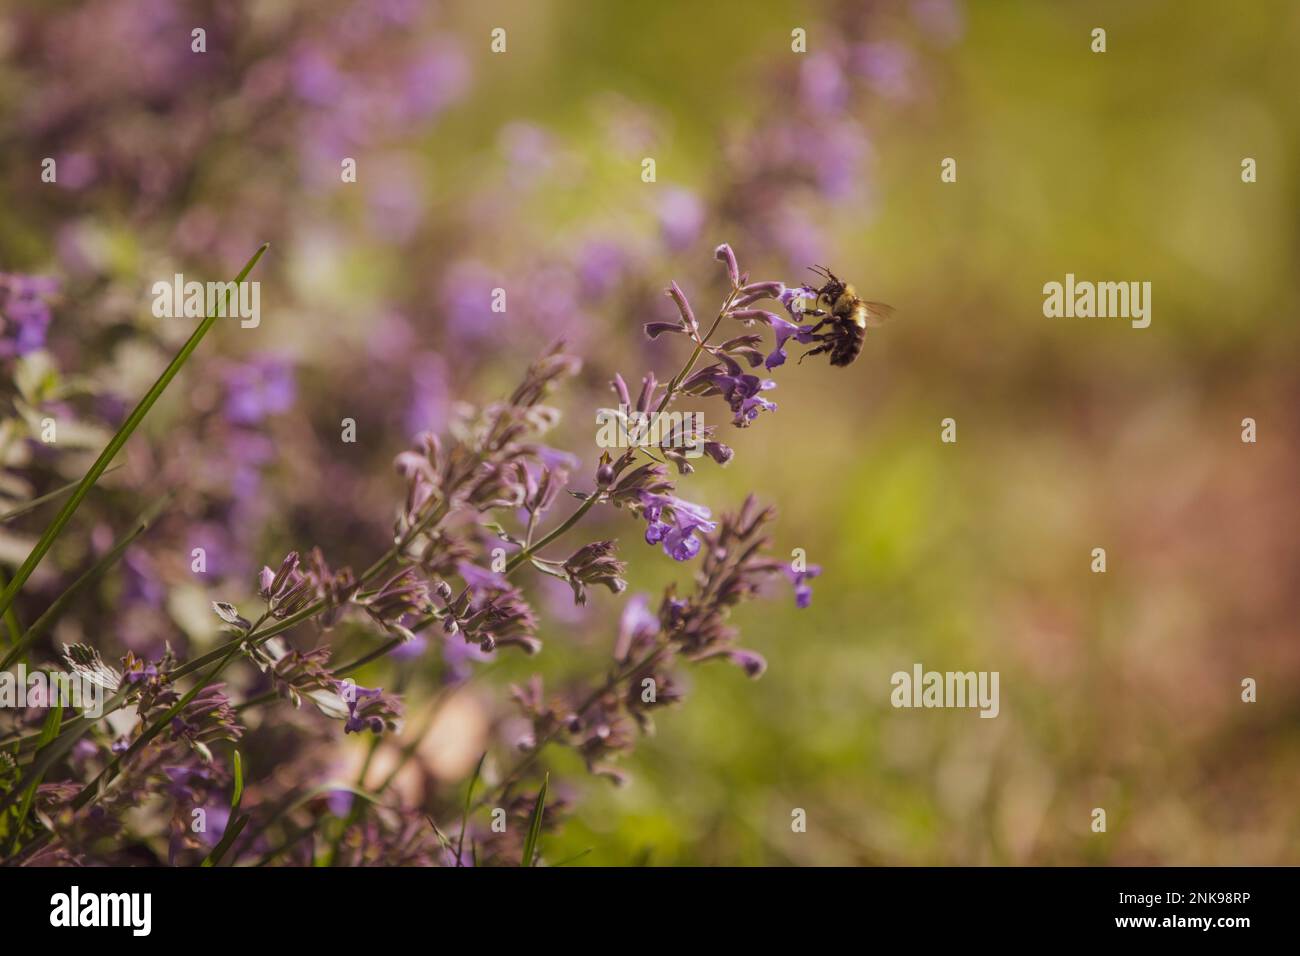 Bee pollinating a Catmint flower in a cottage garden. Stock Photo